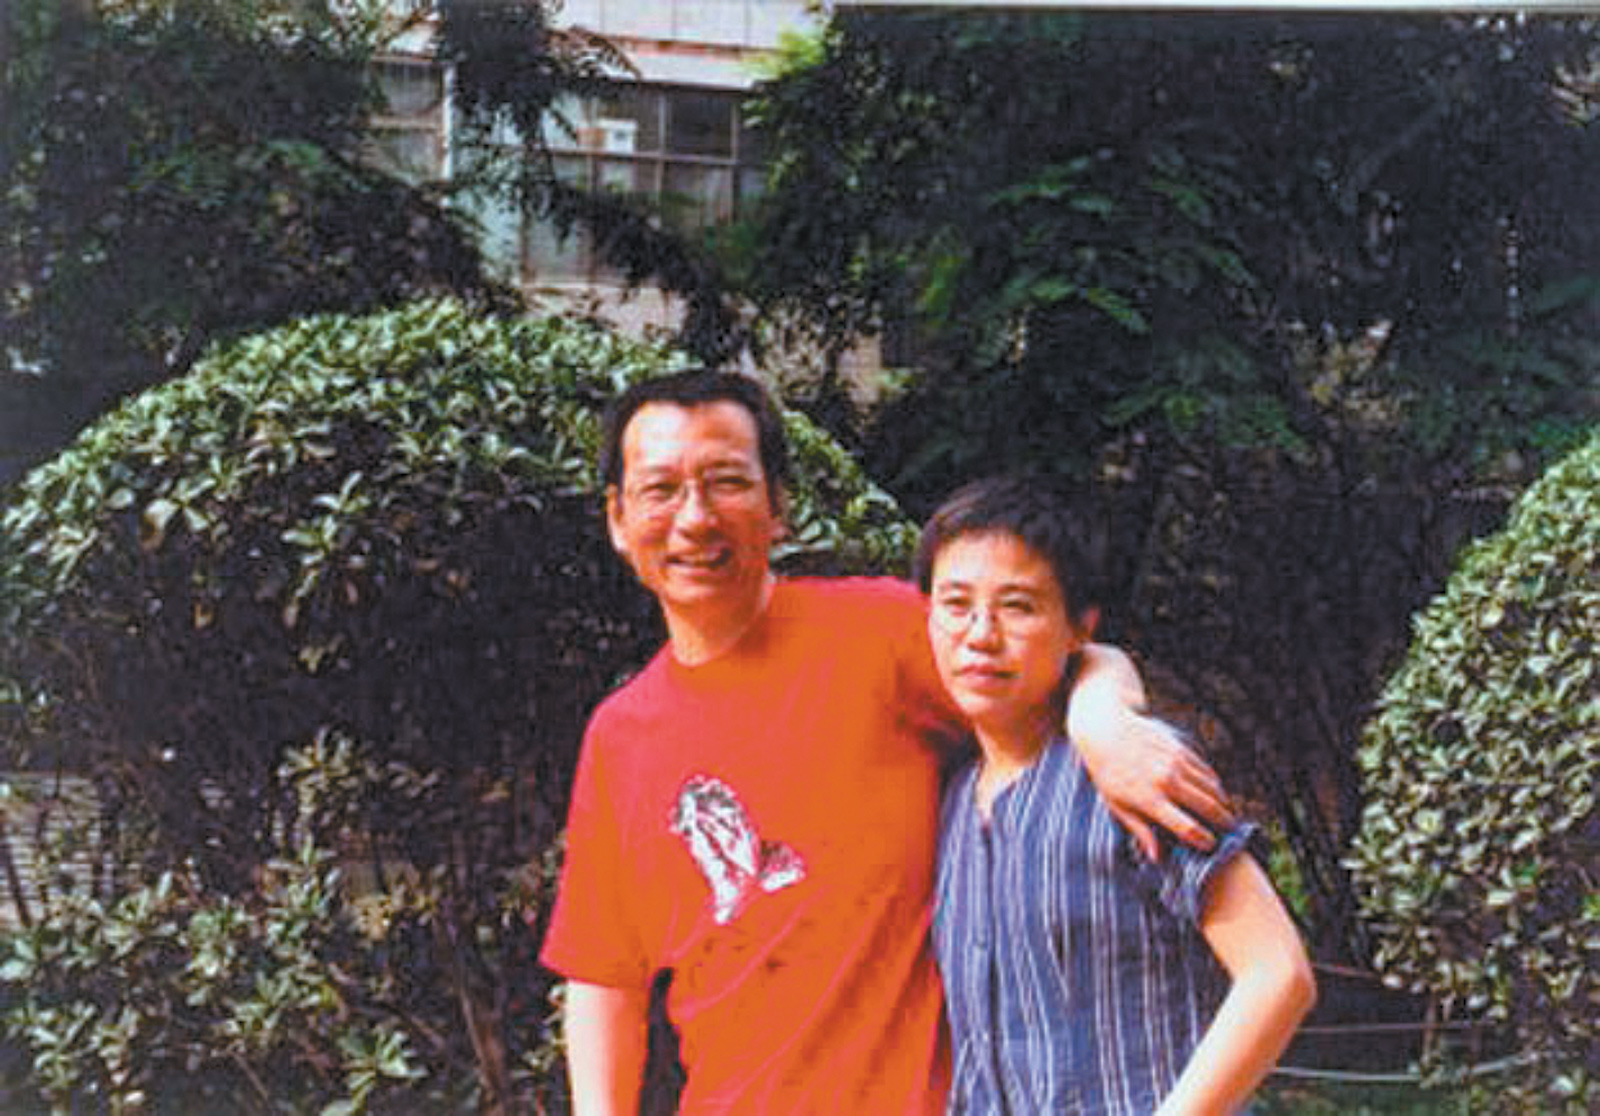 Nobel Peace Prize laureate Liu Xiaobo and his wife Liu Xia in an undated photograph taken before he was sent to prison for ‘subversion of state power’ after he helped to write Charter 08, a petition that called for ‘freedom of speech, freedom of the press, and academic freedom’ in China. She remains under house arrest at their apartment in Beijing.